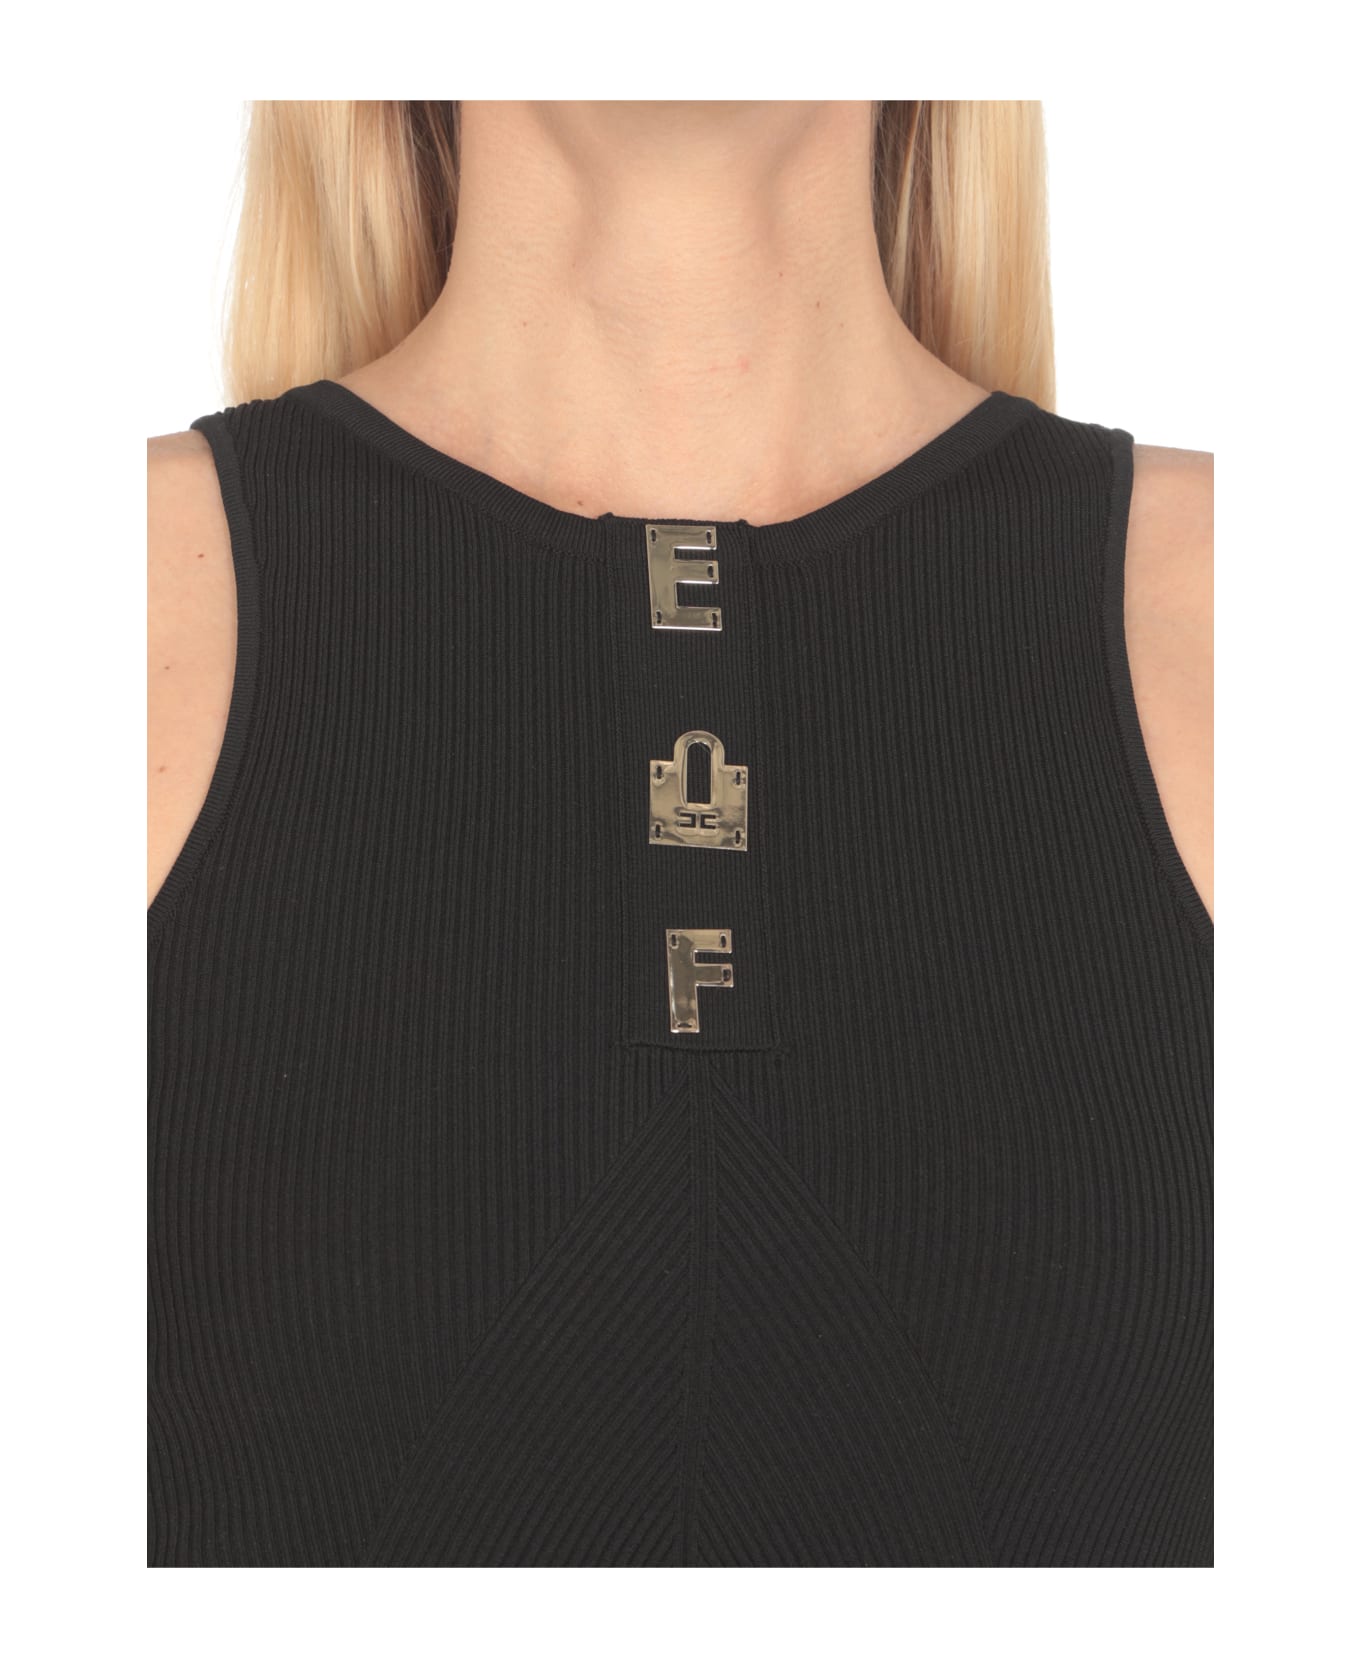 Elisabetta Franchi Cropped Top With Lettering - Black